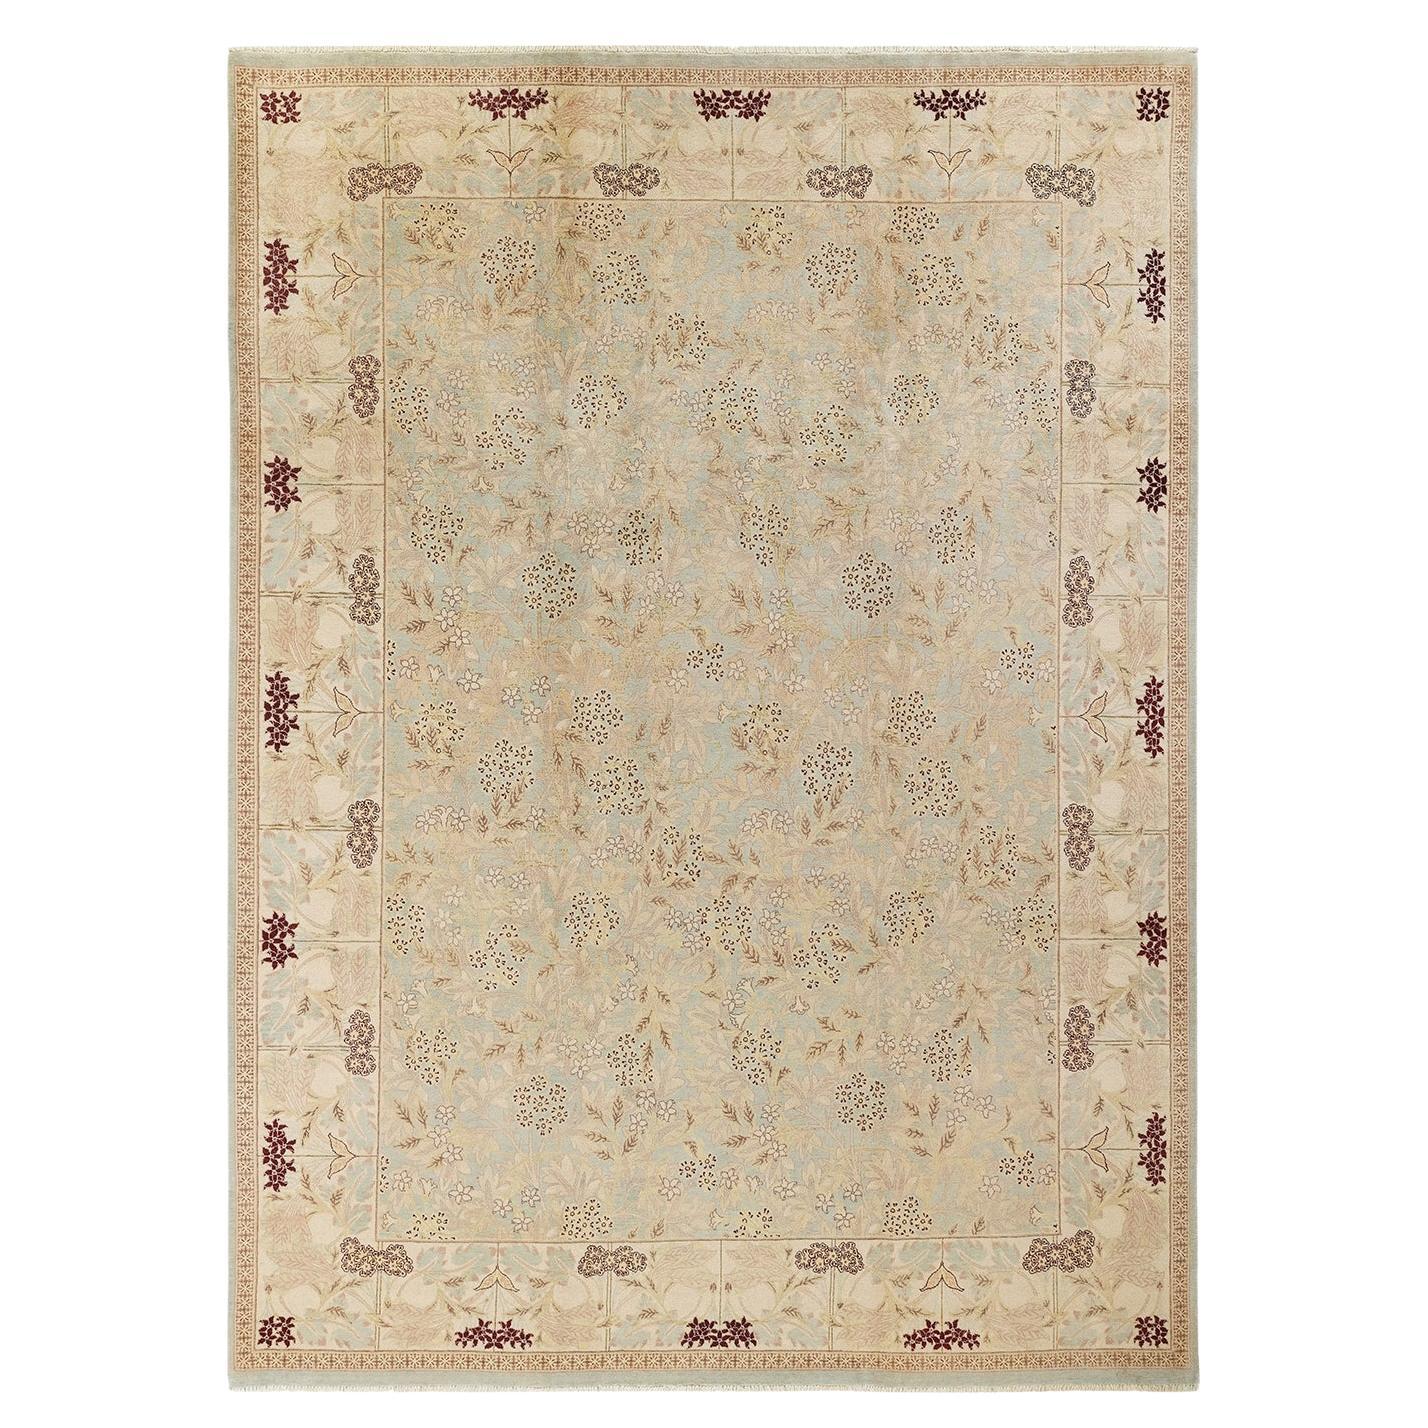 Contemporary Eclectic Hand Knotted Wool Light Blue Area Rug